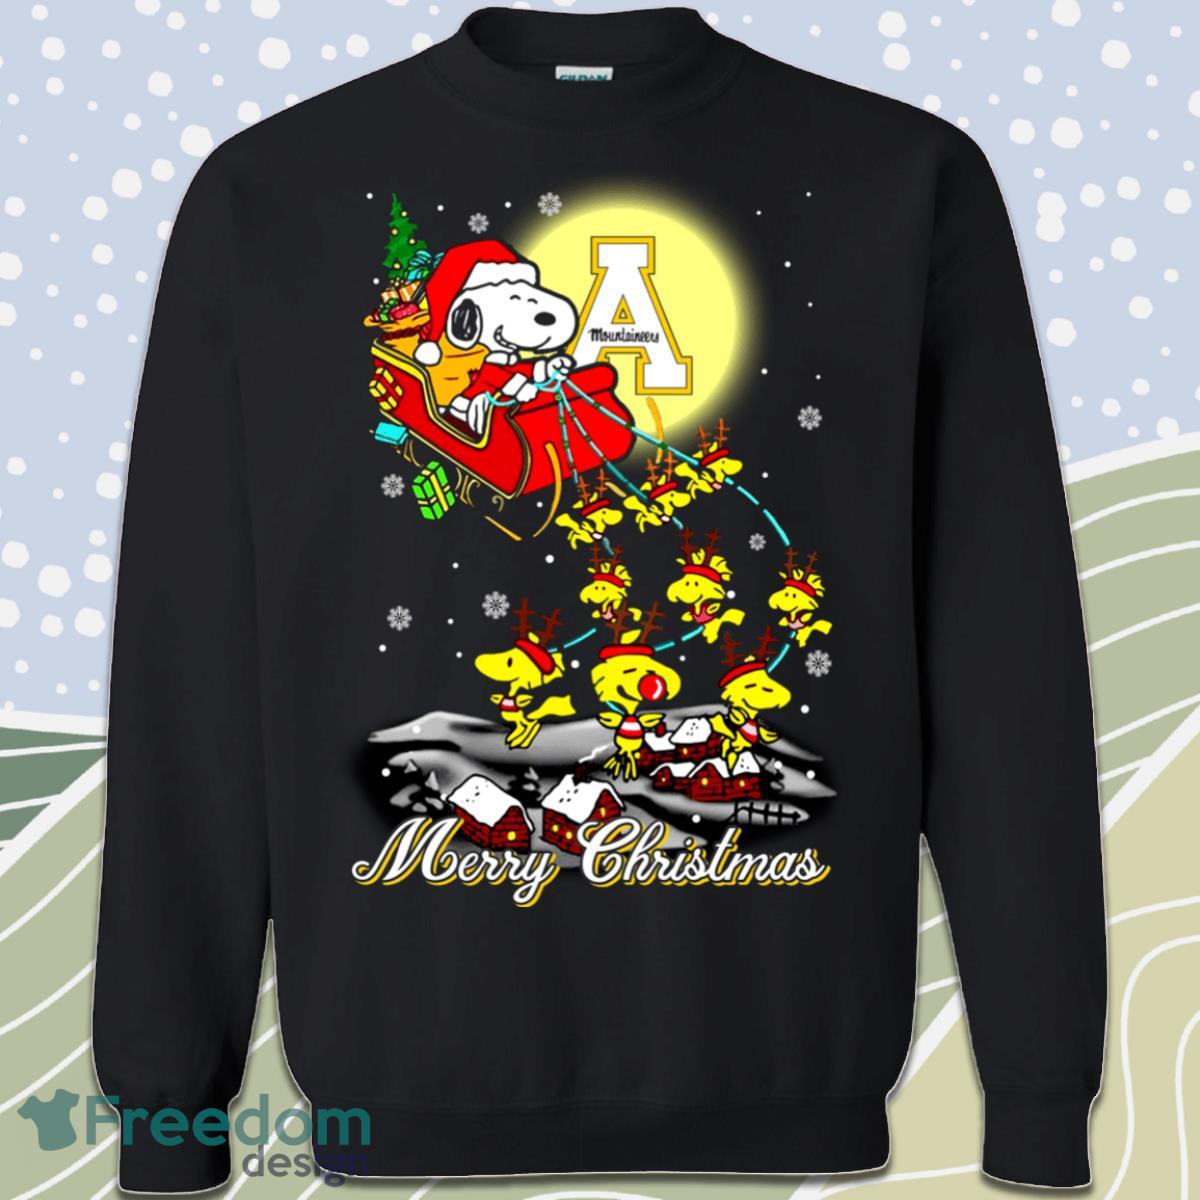 Appalachian State Mountaineers Santa Claus With Sleigh And Snoopy Christmas Sweatshirts Product Photo 1